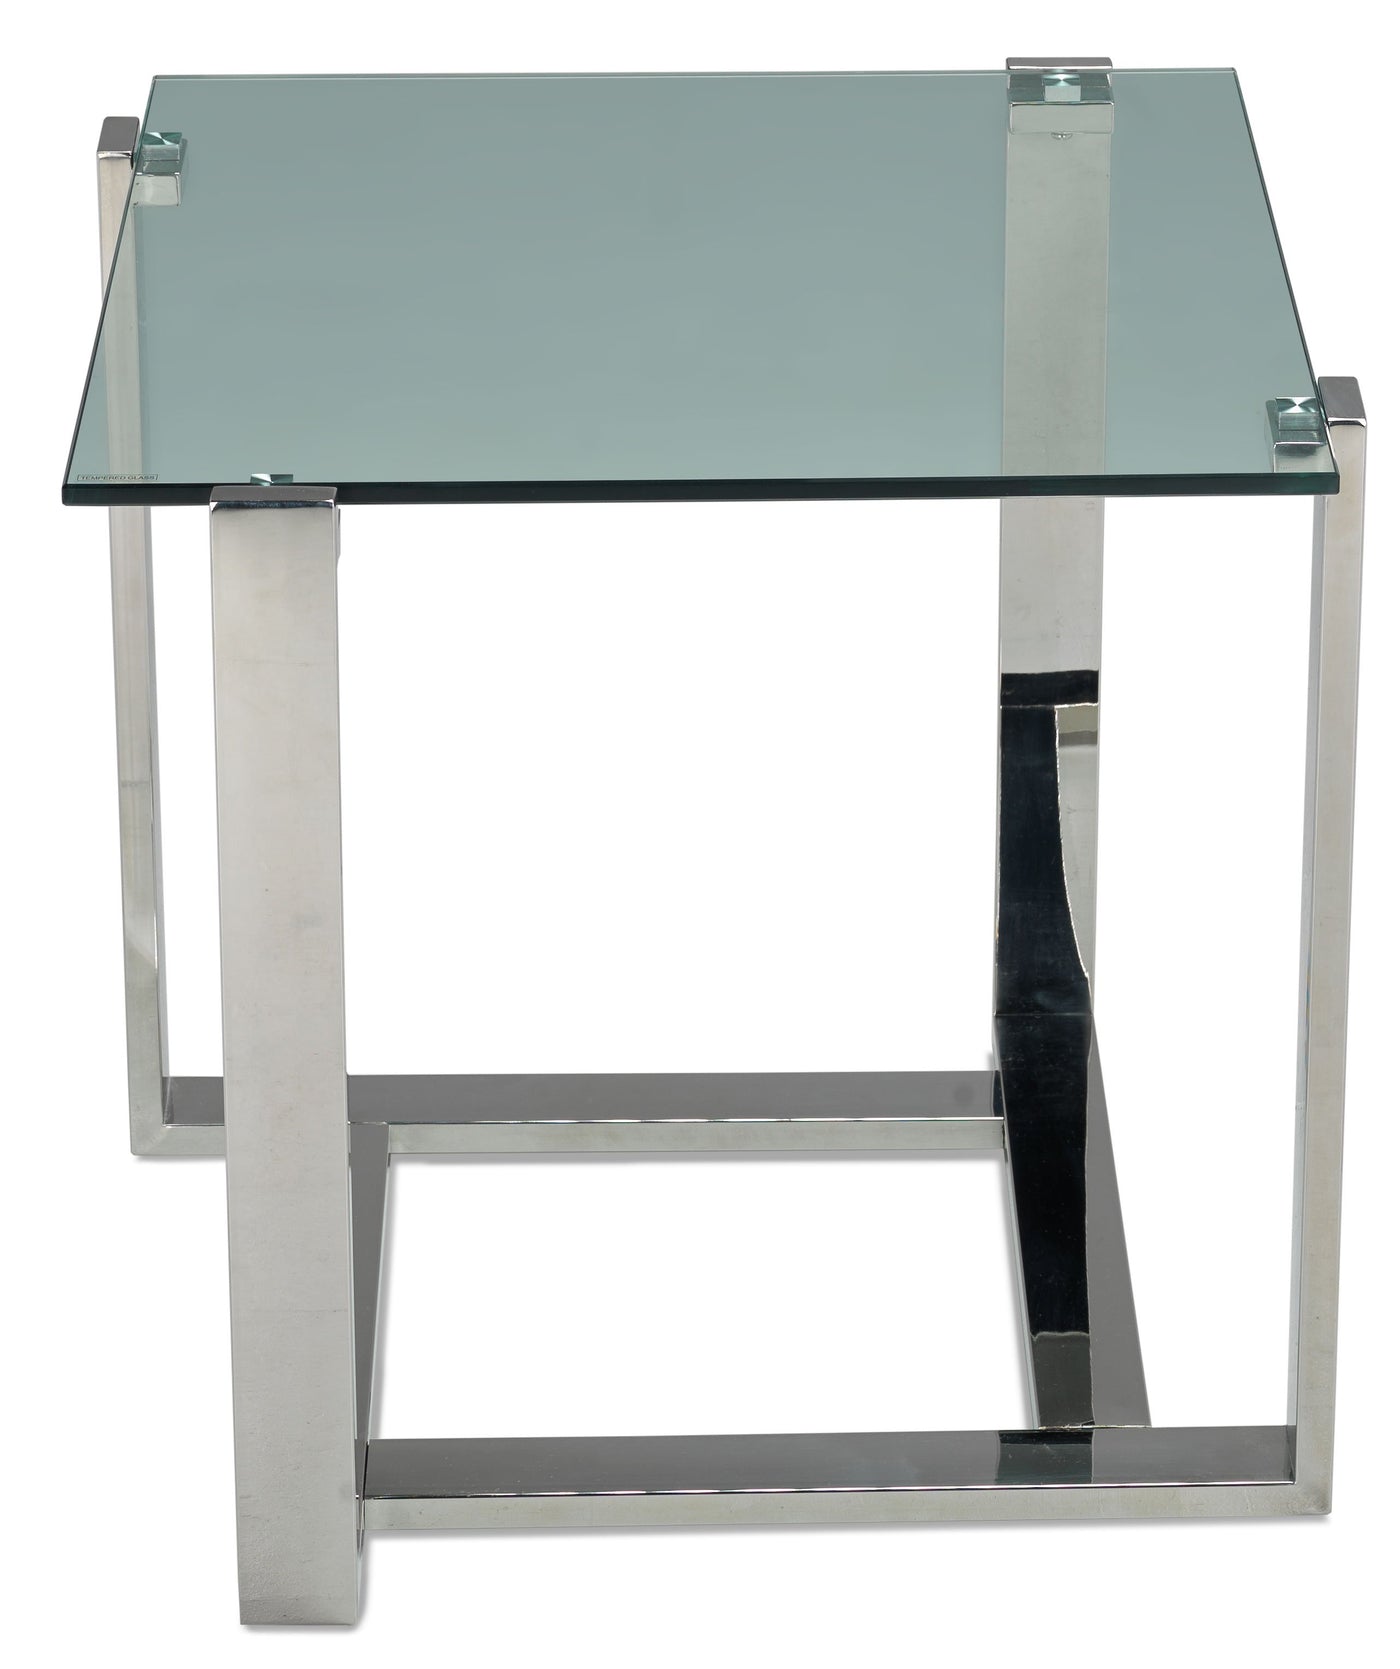 Sidney End Table - Stainless Steel and Glass